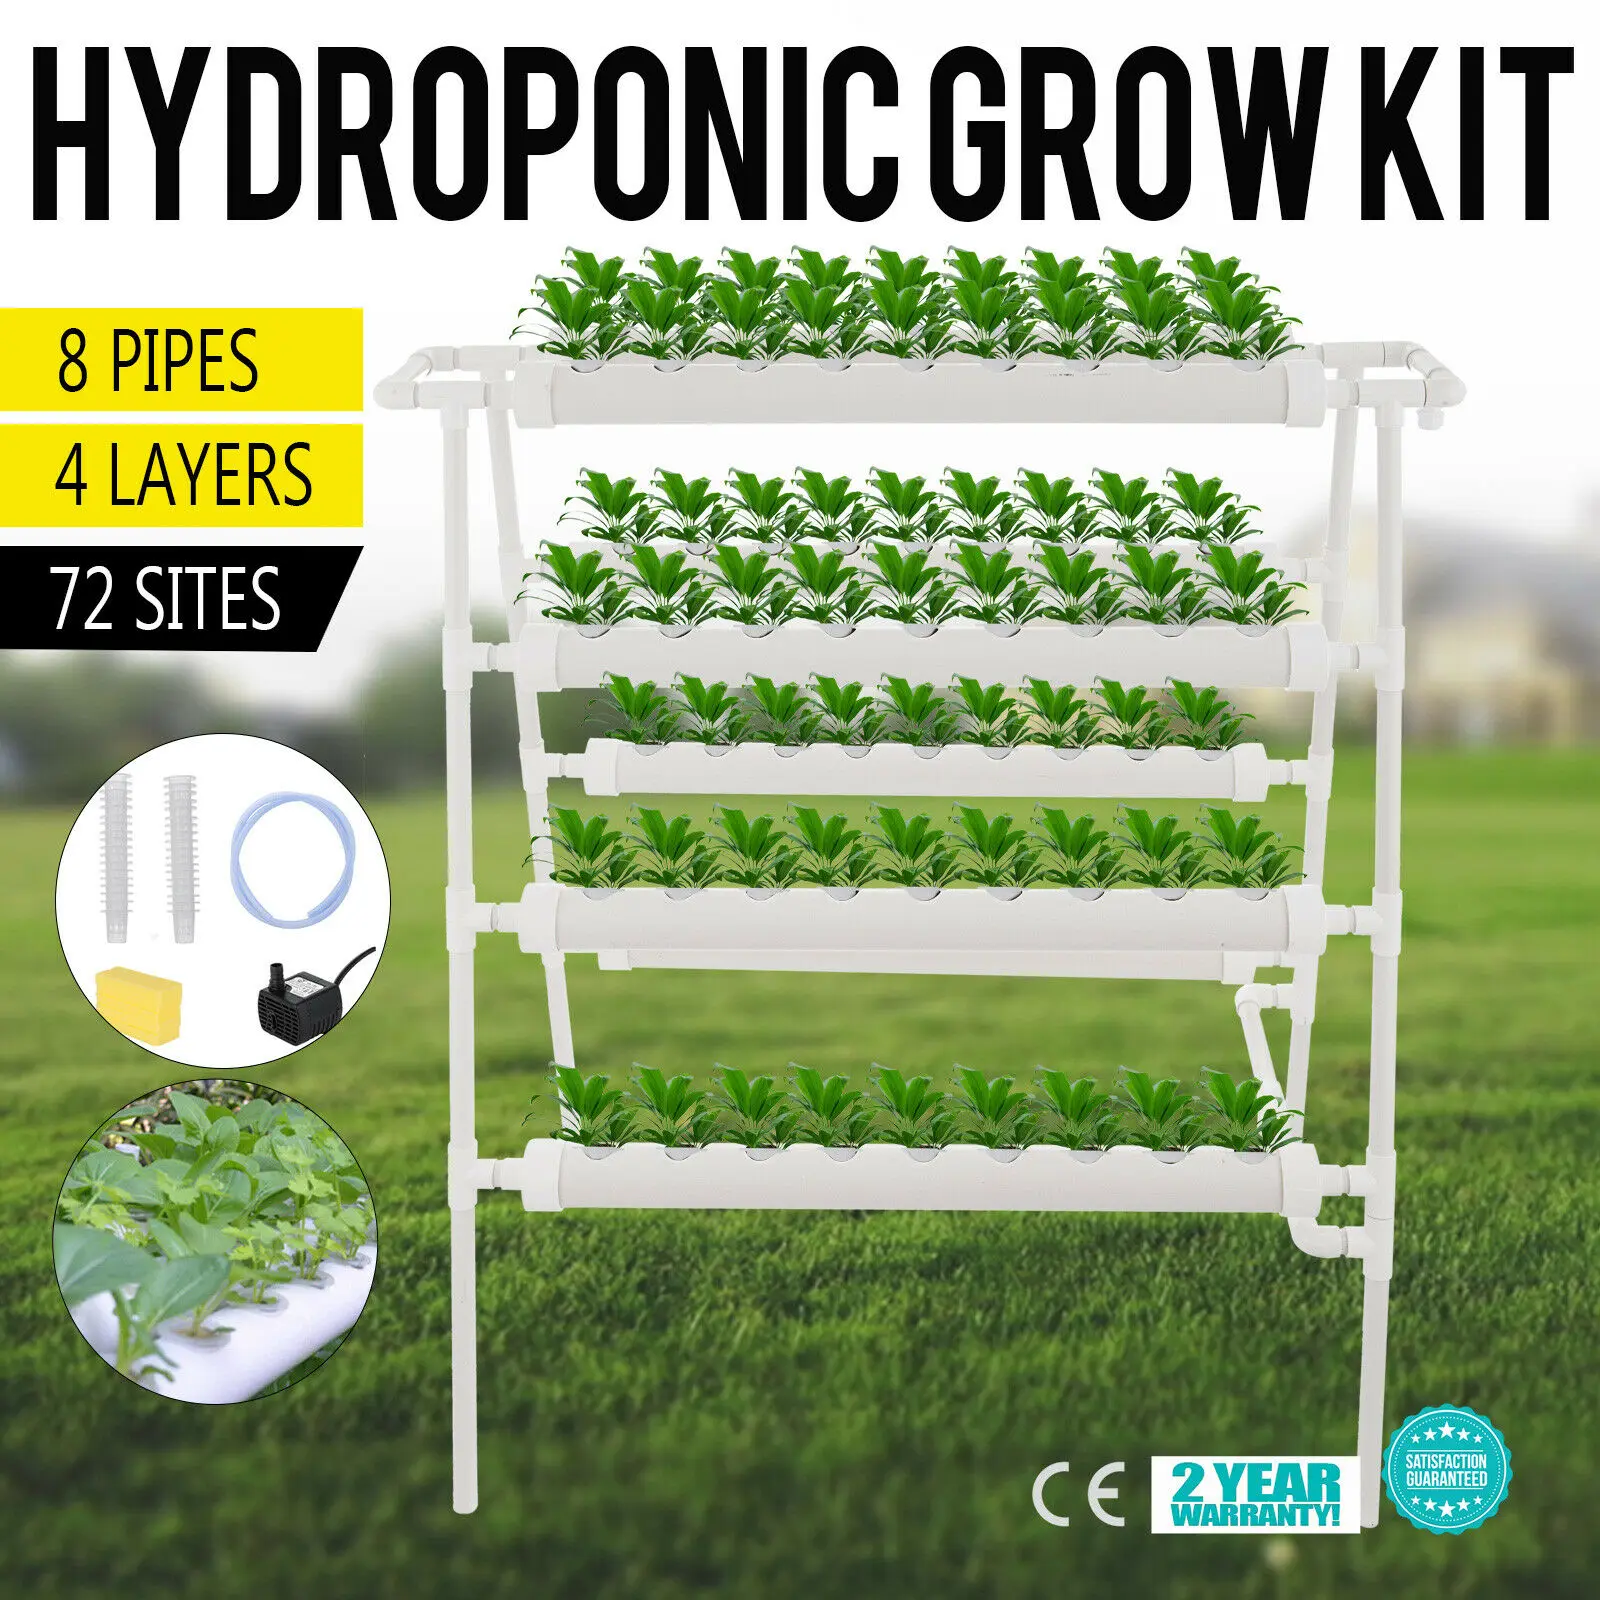 Hydroponic Grow Kit 8 Pipes 4 Layers 72 Plant Sites Food Grade System Melons